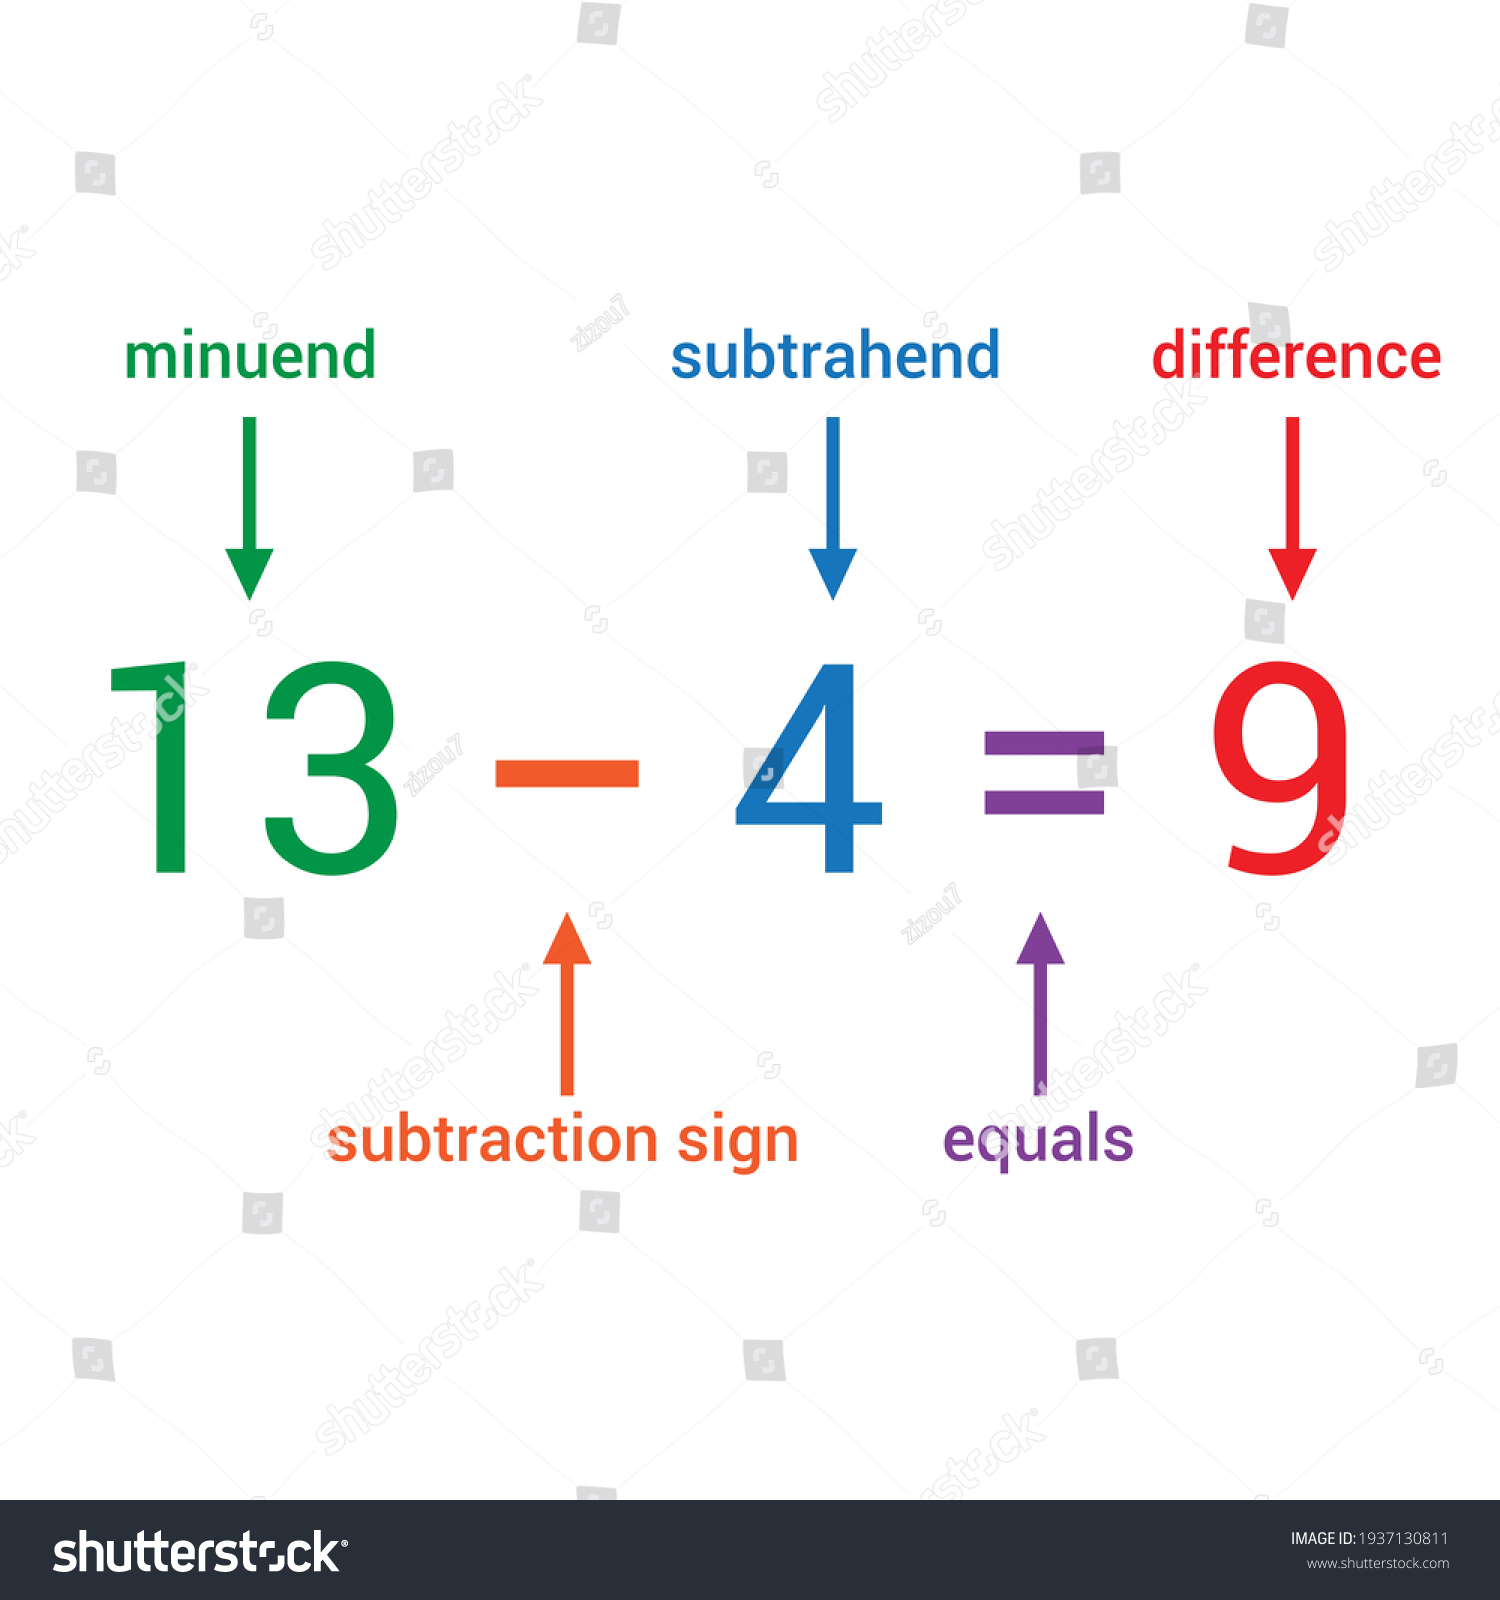 parts-subtraction-number-sentence-stock-vector-royalty-free-1937130811